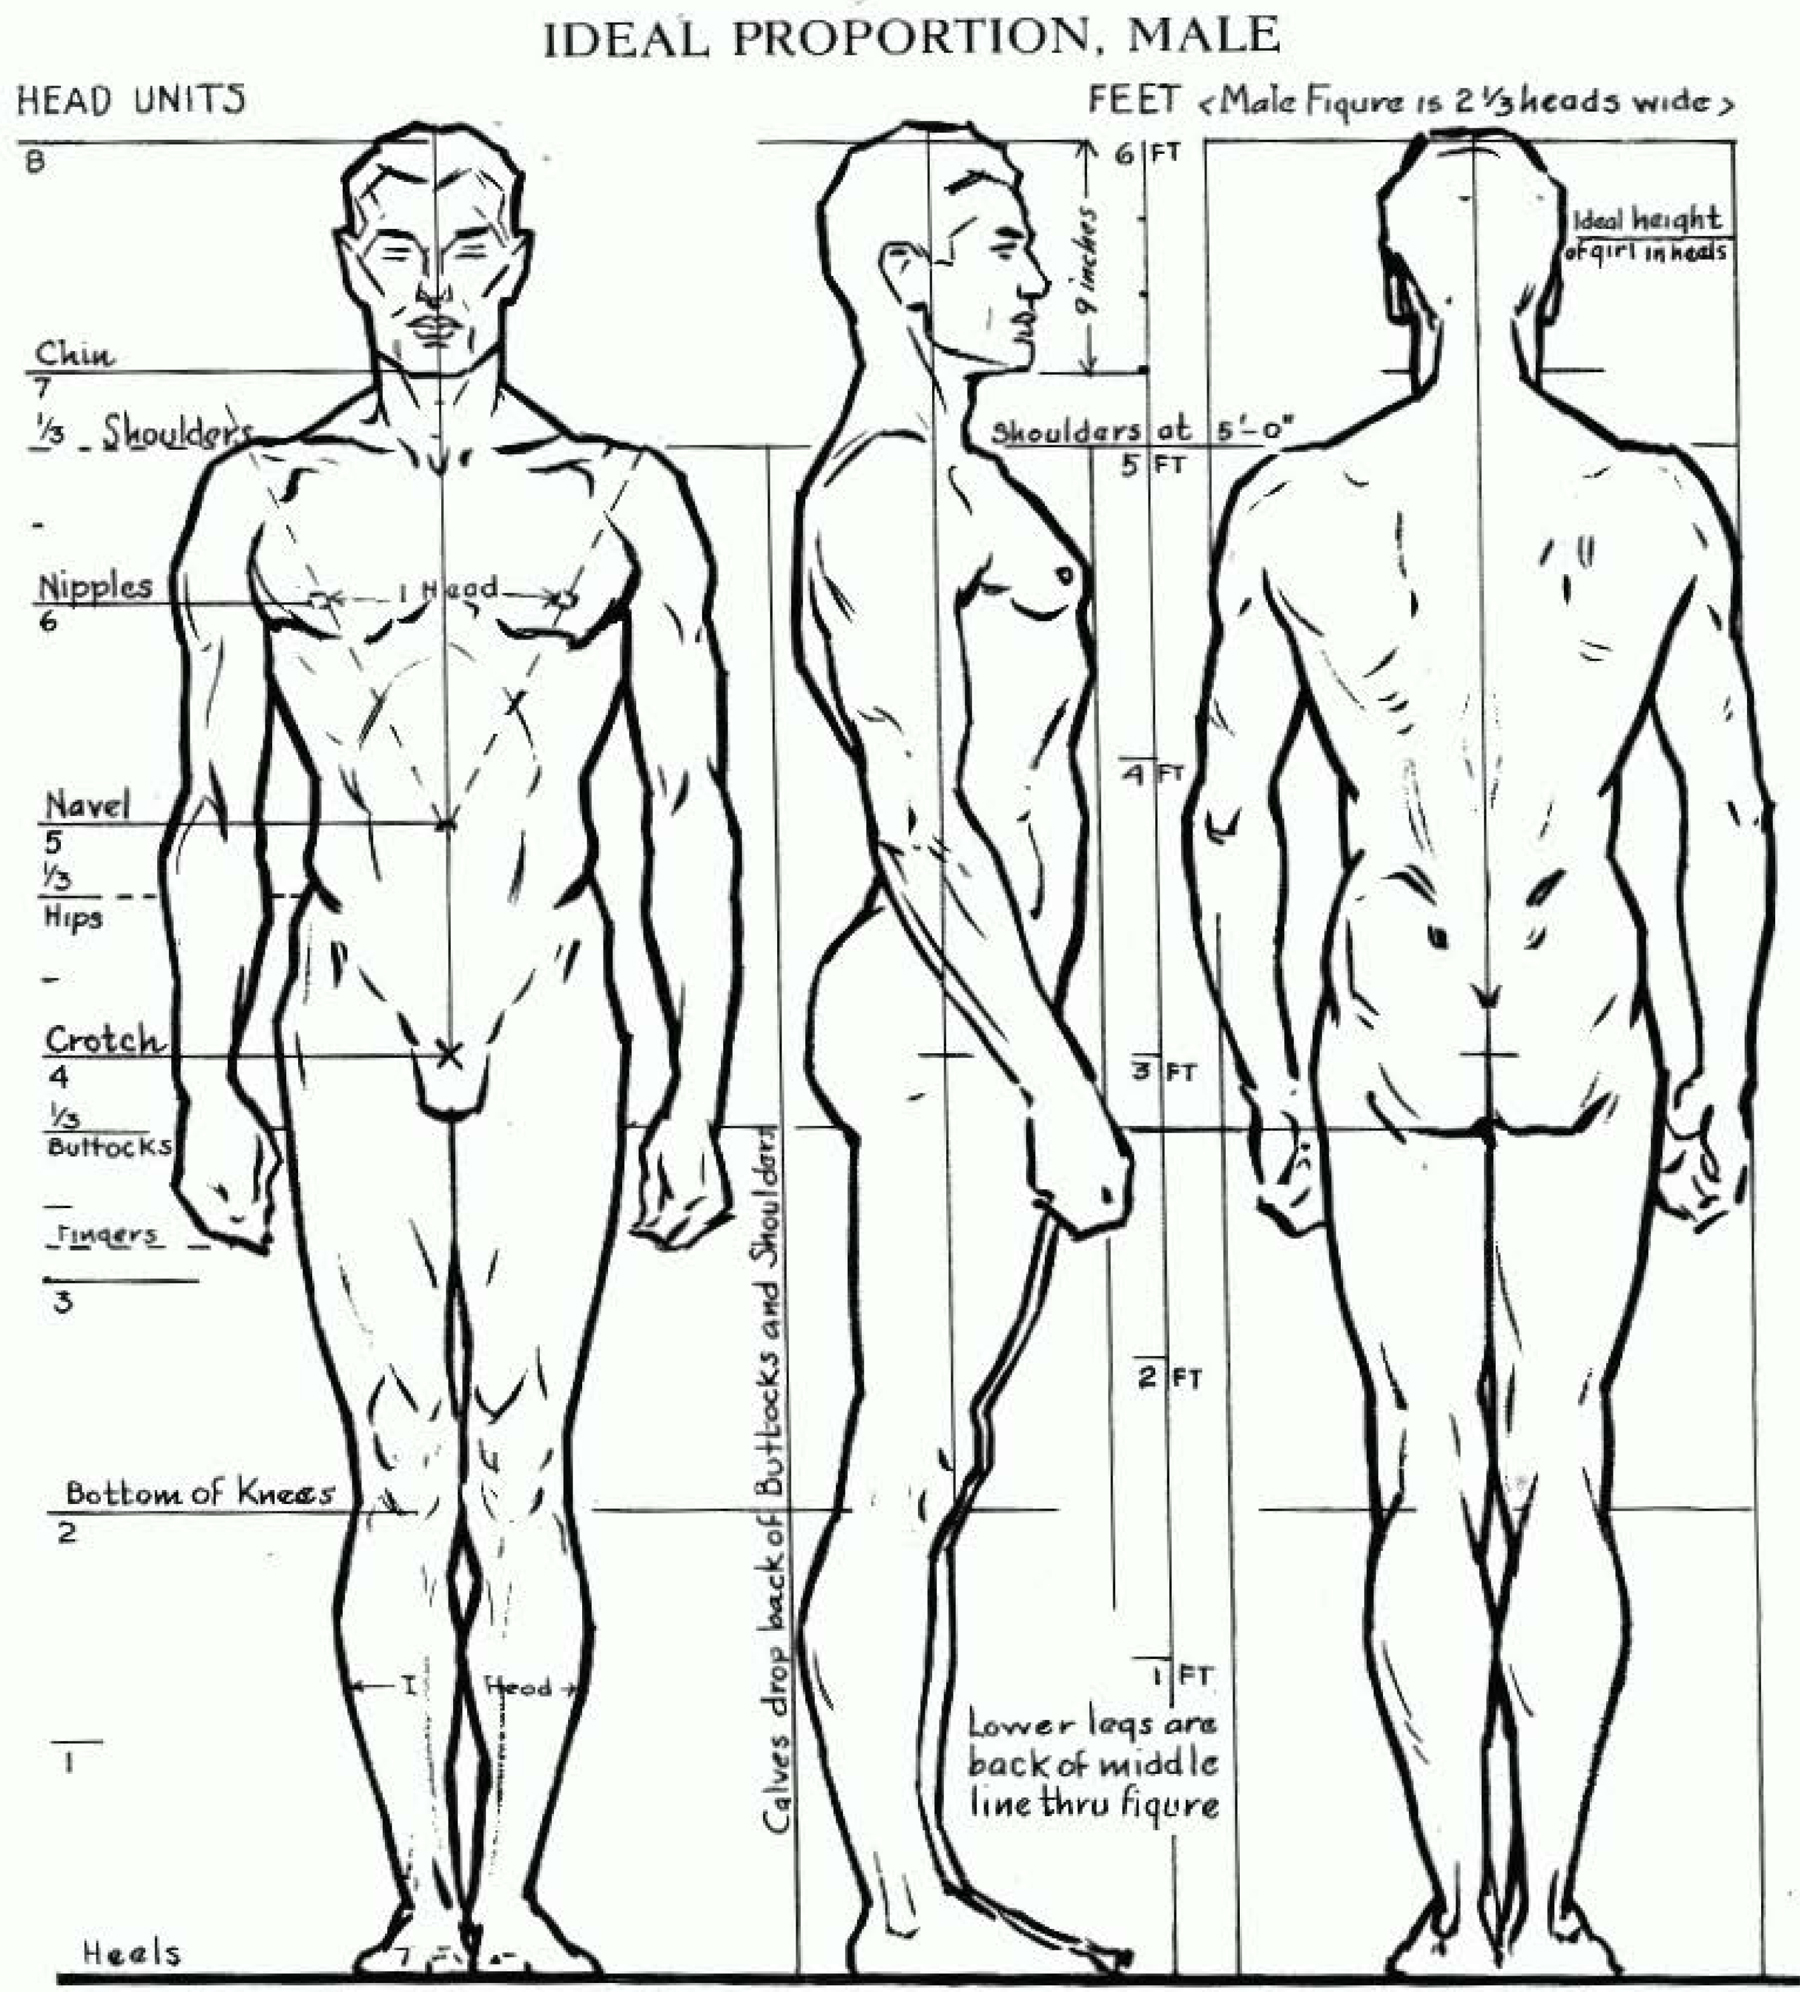 Proportions of the Human Figure : How to Draw the Male Figure in Correct Proportions